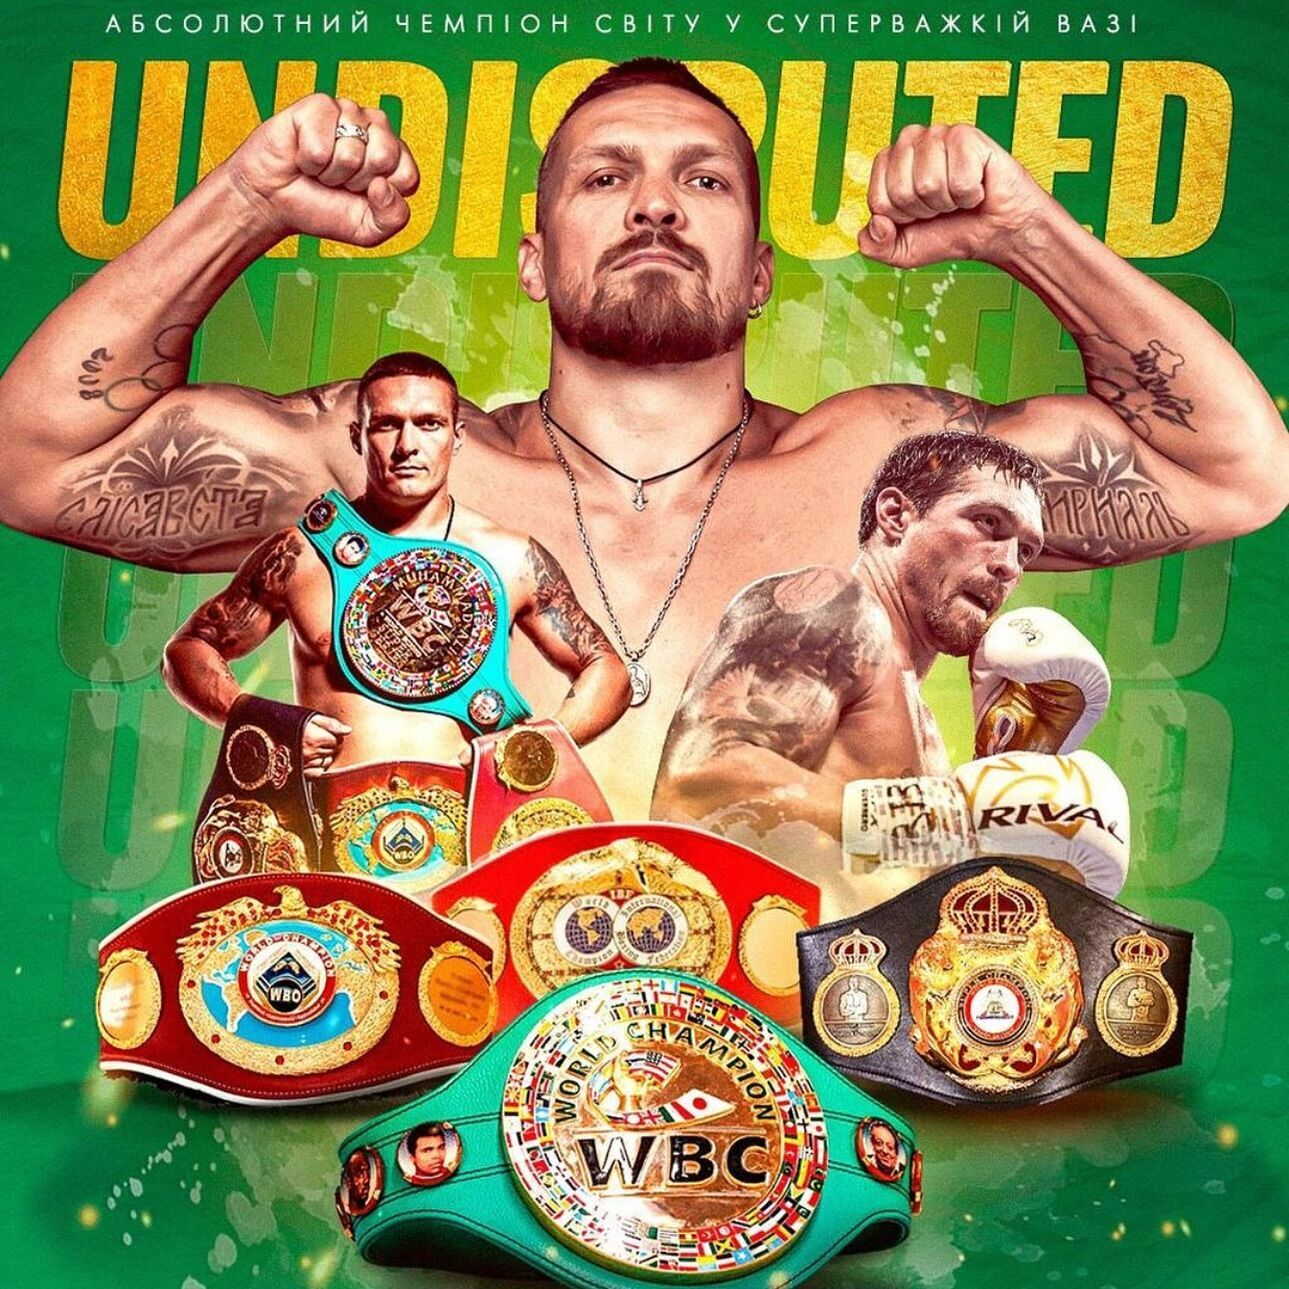 Usyk's fate announced after winning the rematch over Fury